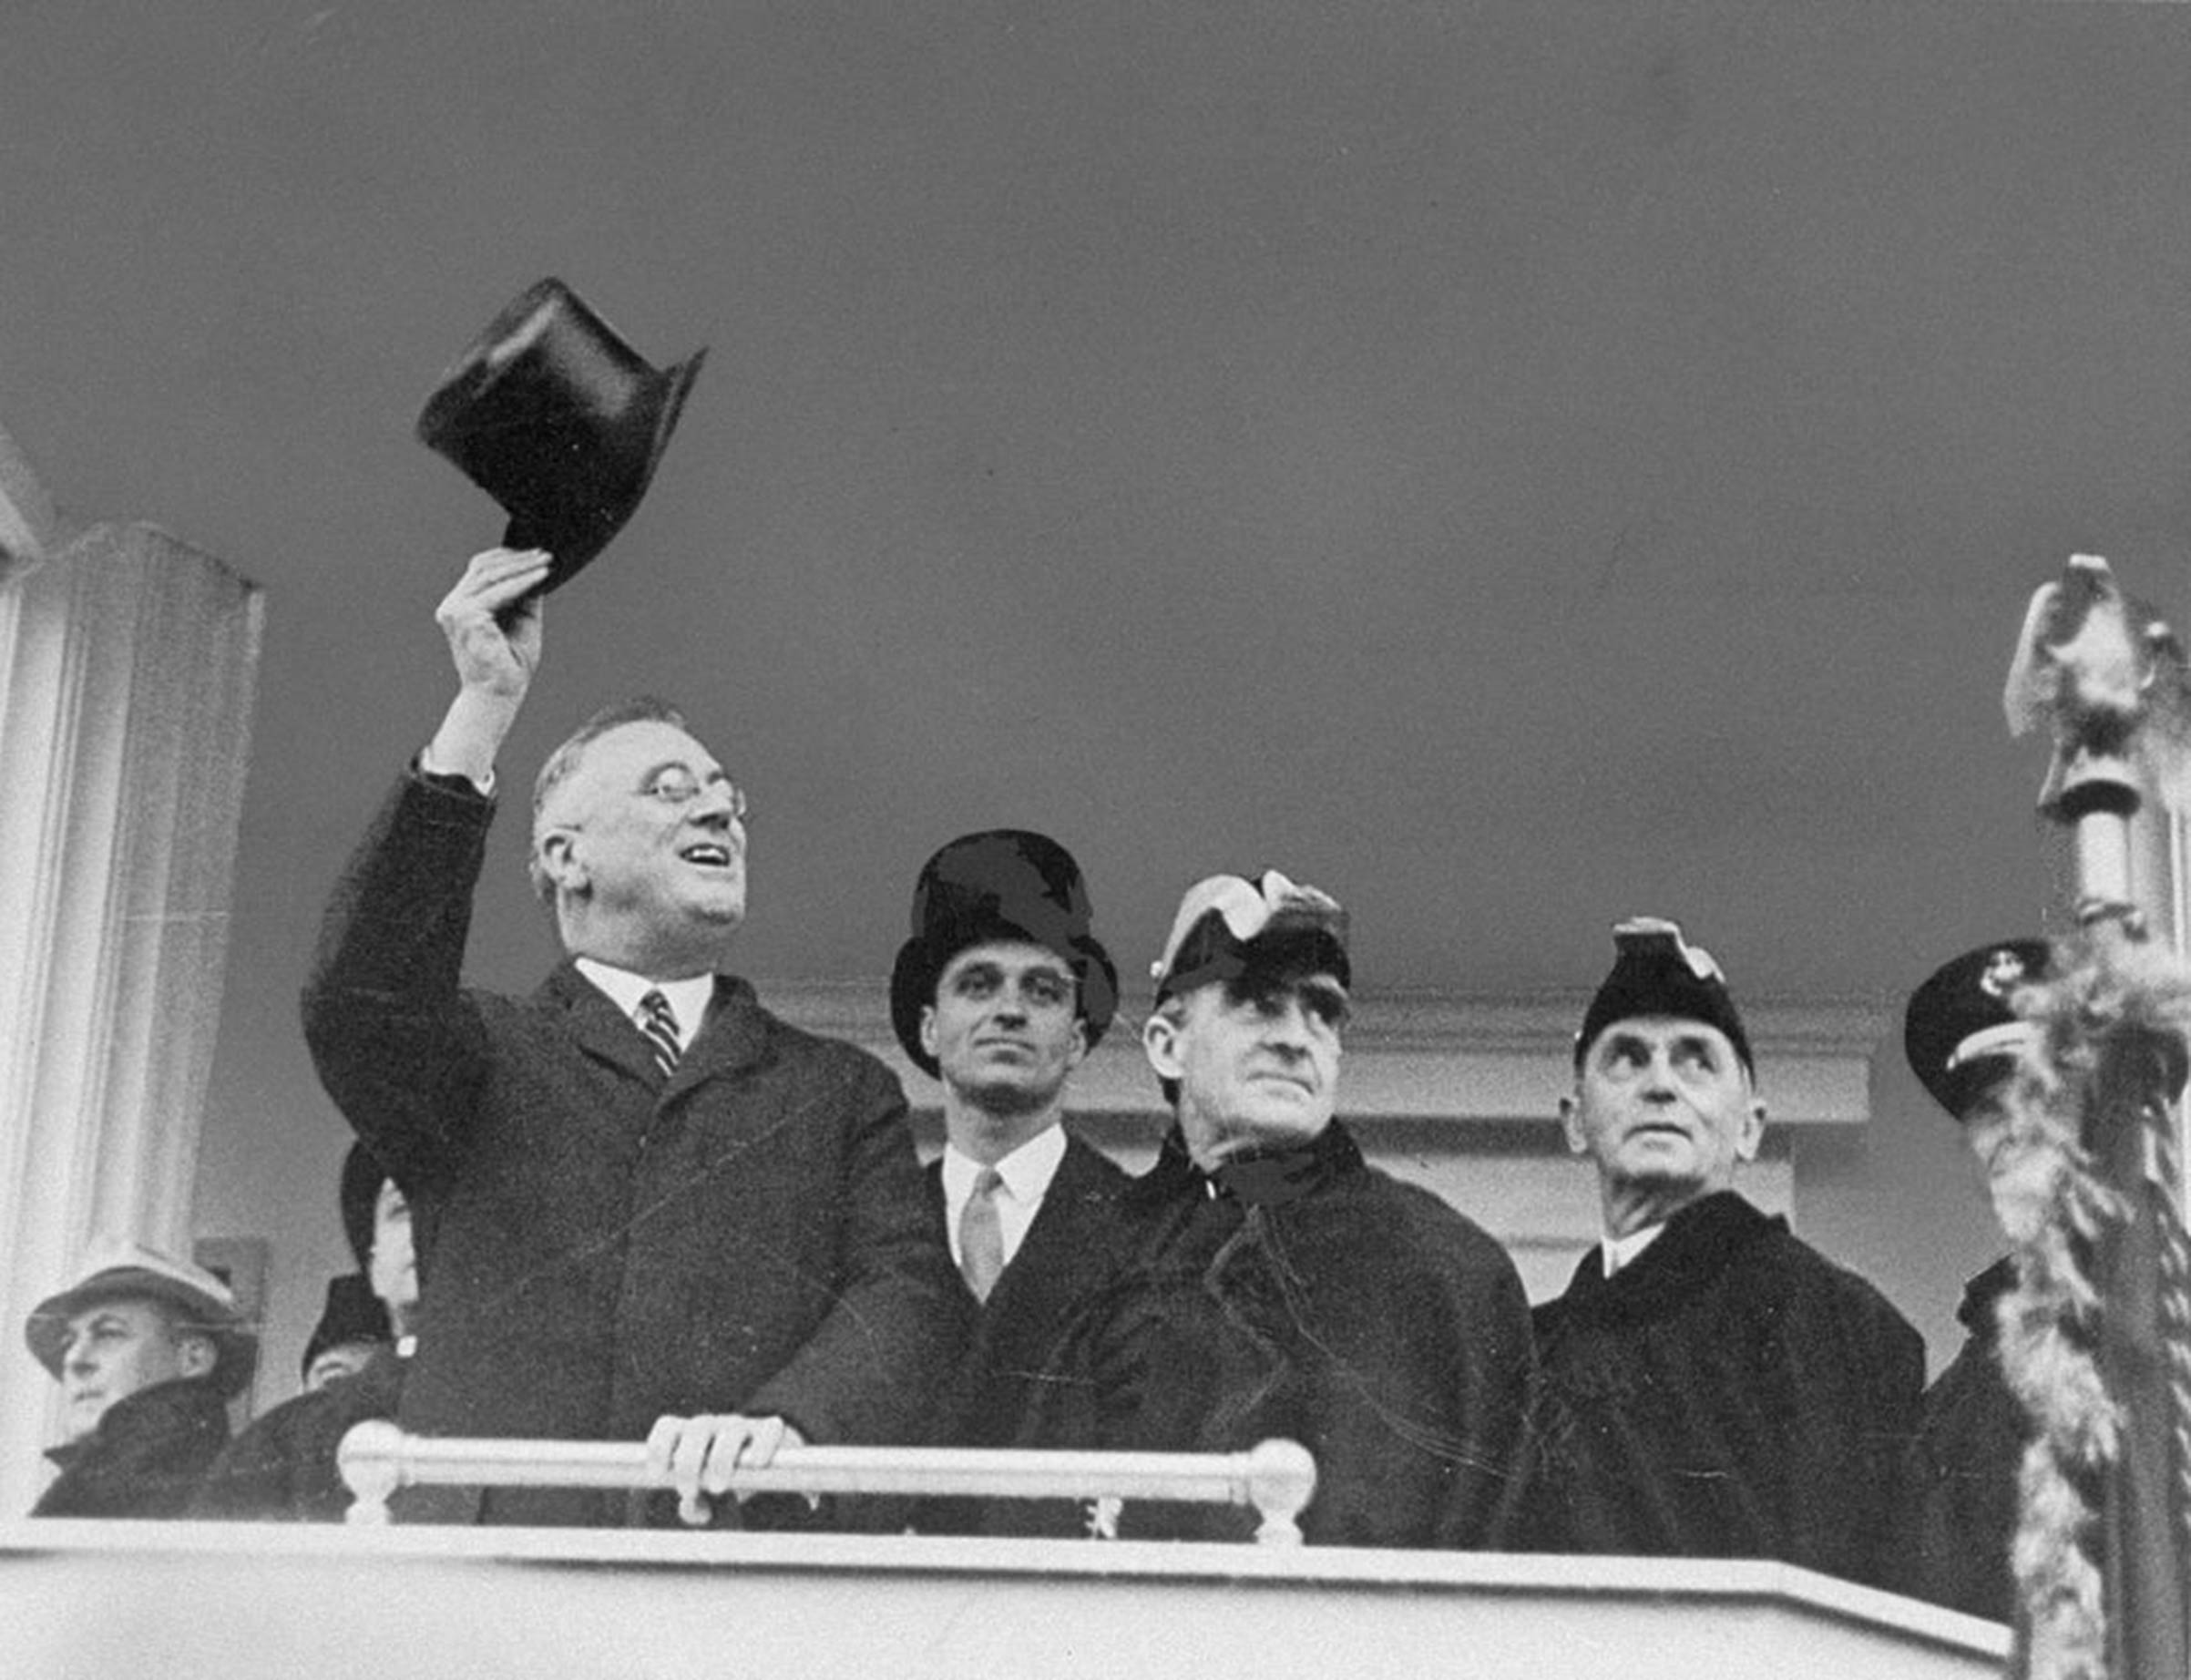 President Franklin D. Roosevelt at his second inauguration ceremony on Jan. 20, 1937, in Washington, D.C. at the U.S. Capitol. (Thomas D. Mcavoy/The LIFE Picture Collection—Getty Images)